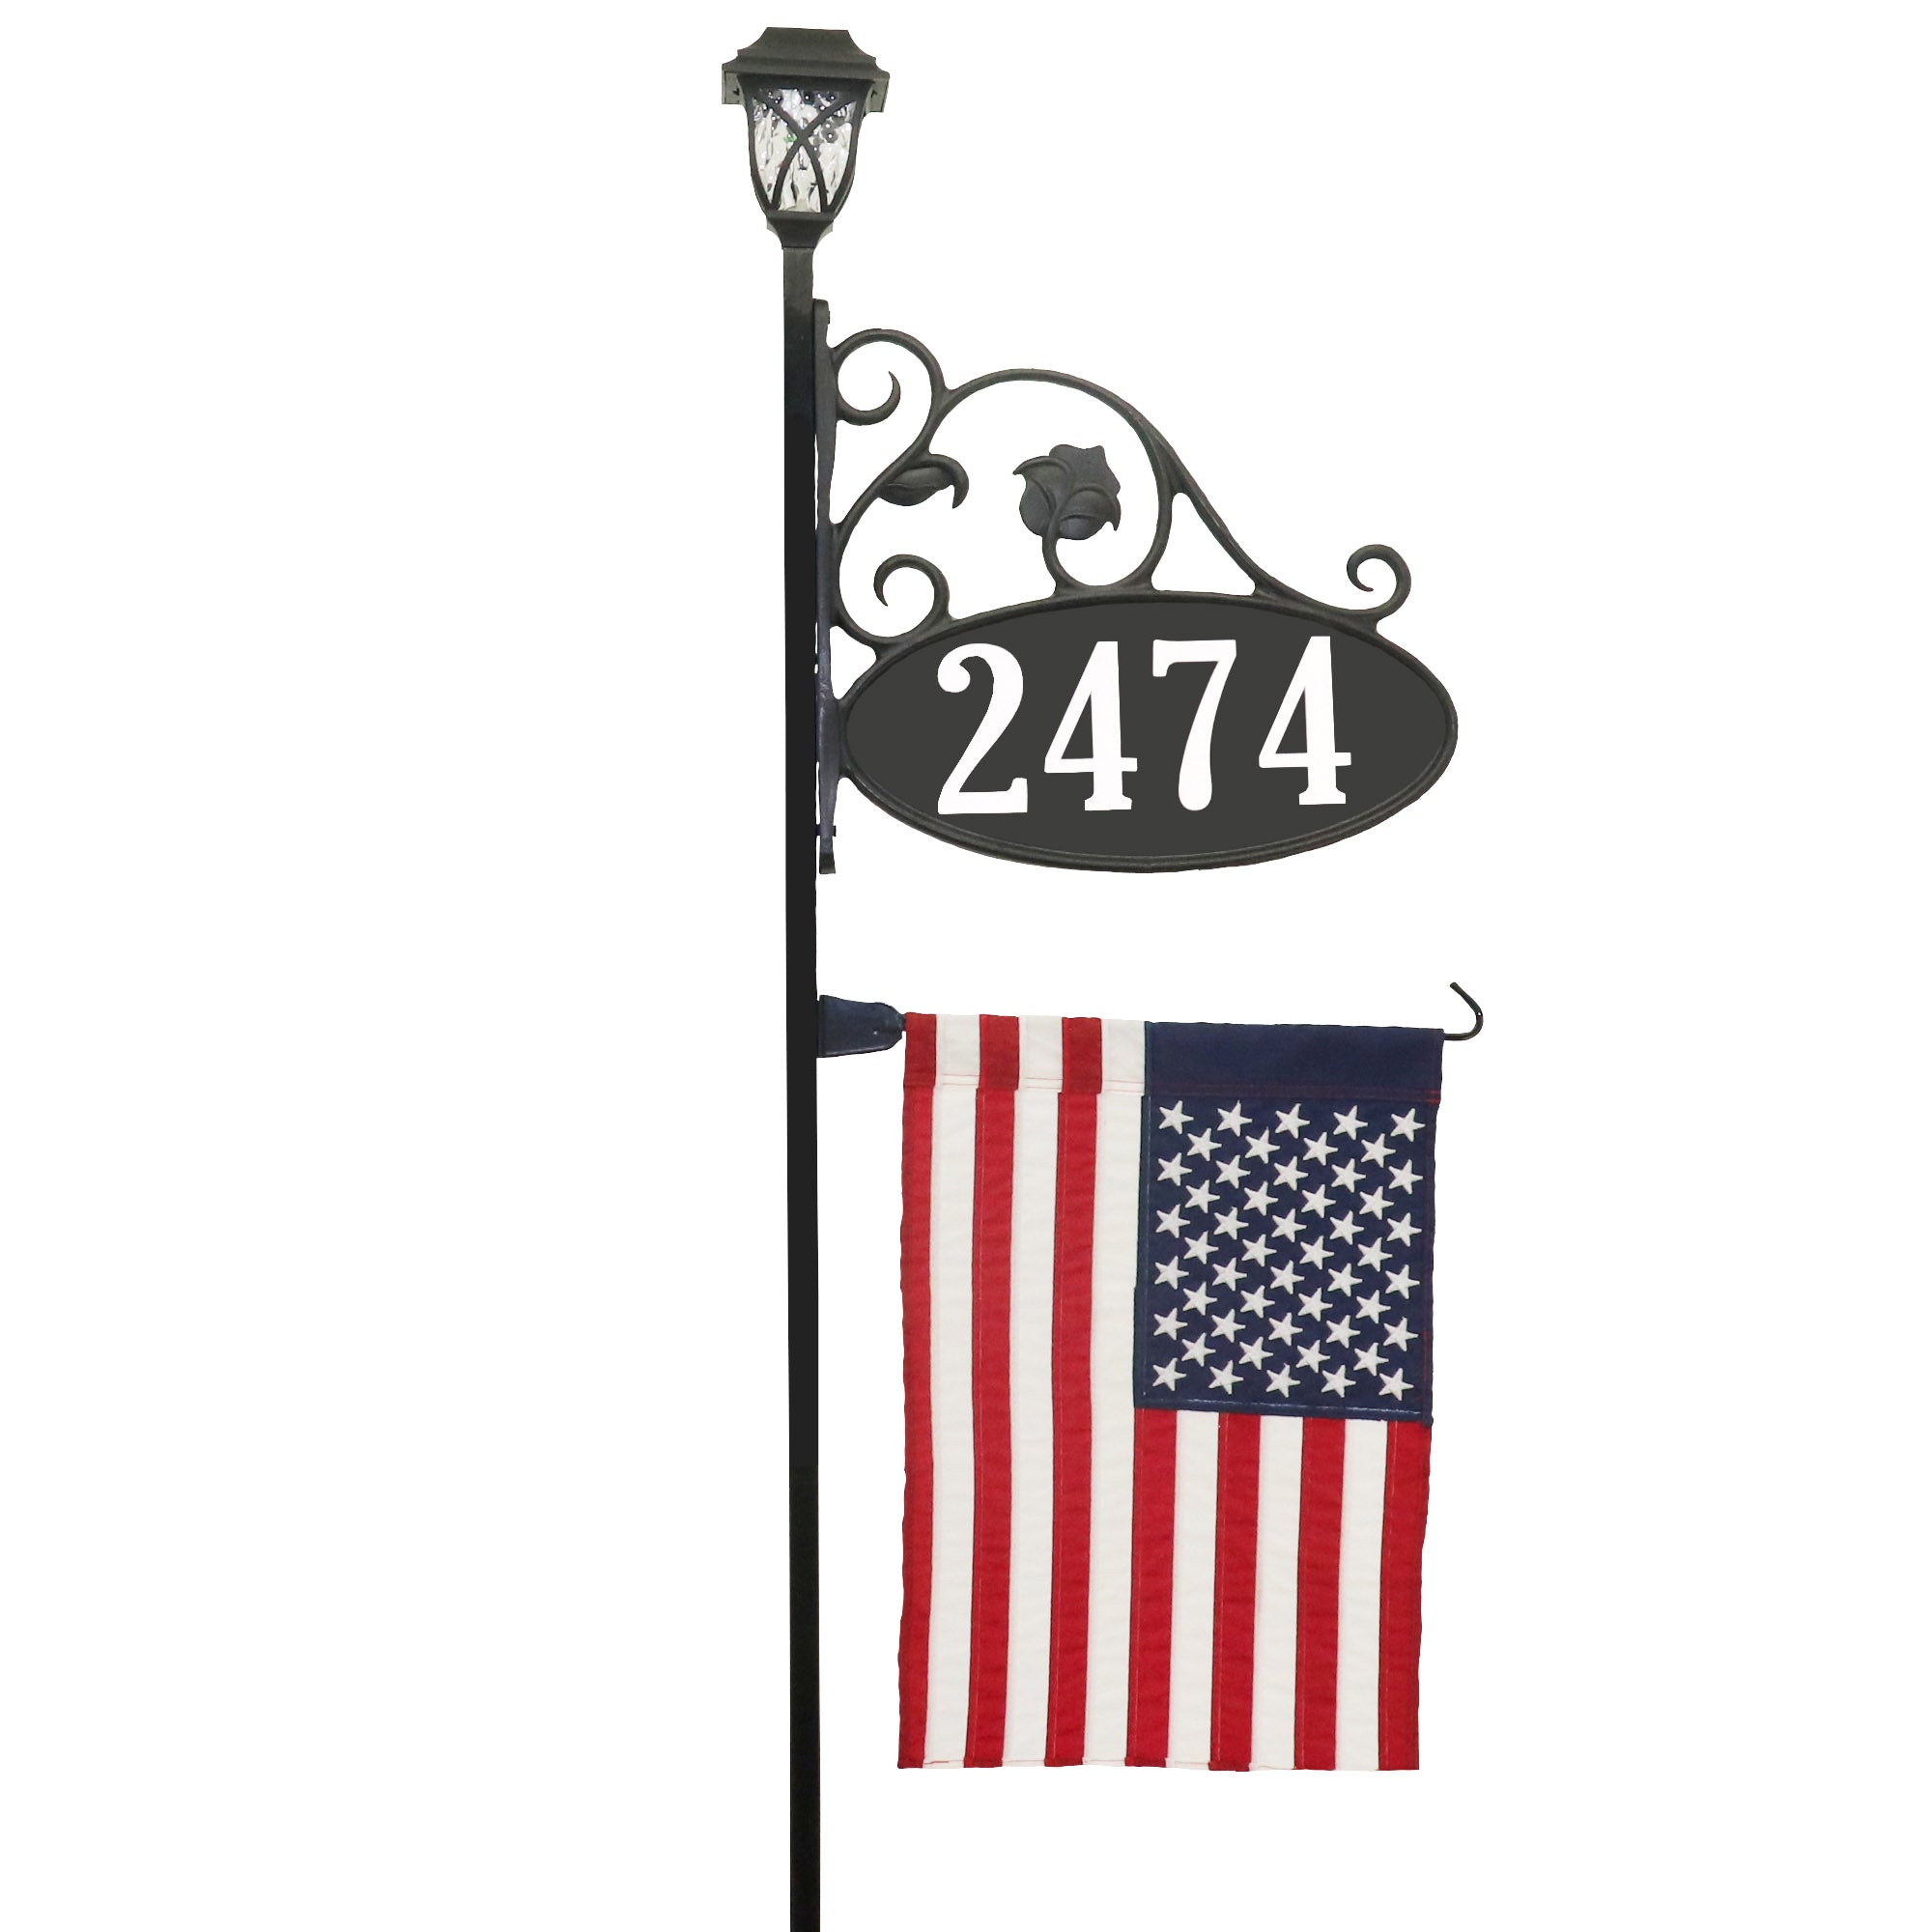 Featured Reflective Address Signs